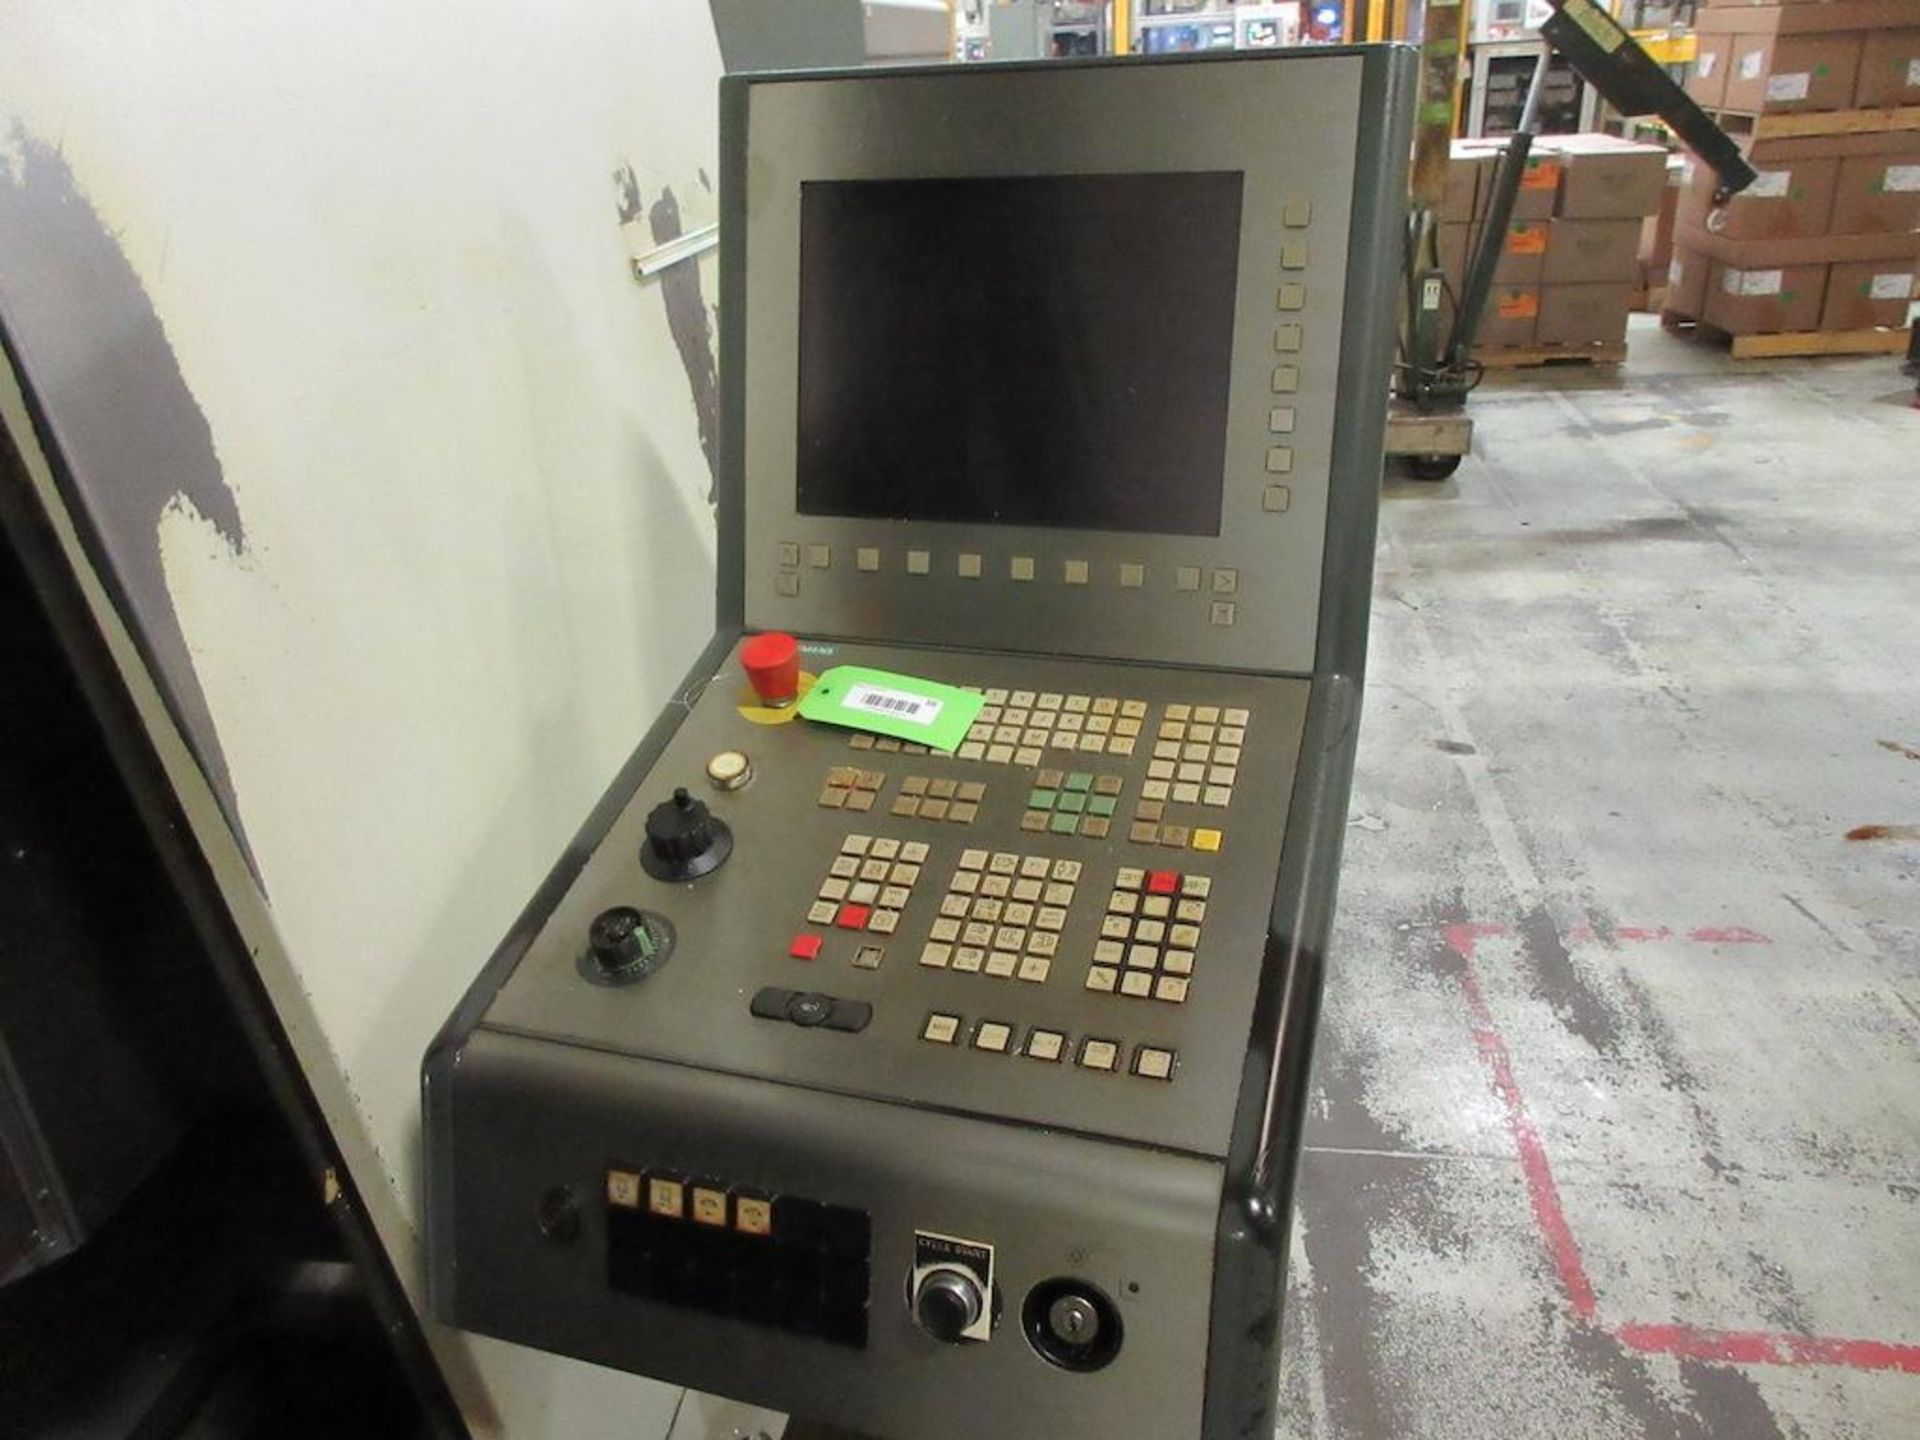 2007 DMG CNC Lathe, Model Twin 65, Twin Spindle, 4 Axis, CNC Control, B-Axis, Max. Turning - Image 3 of 16